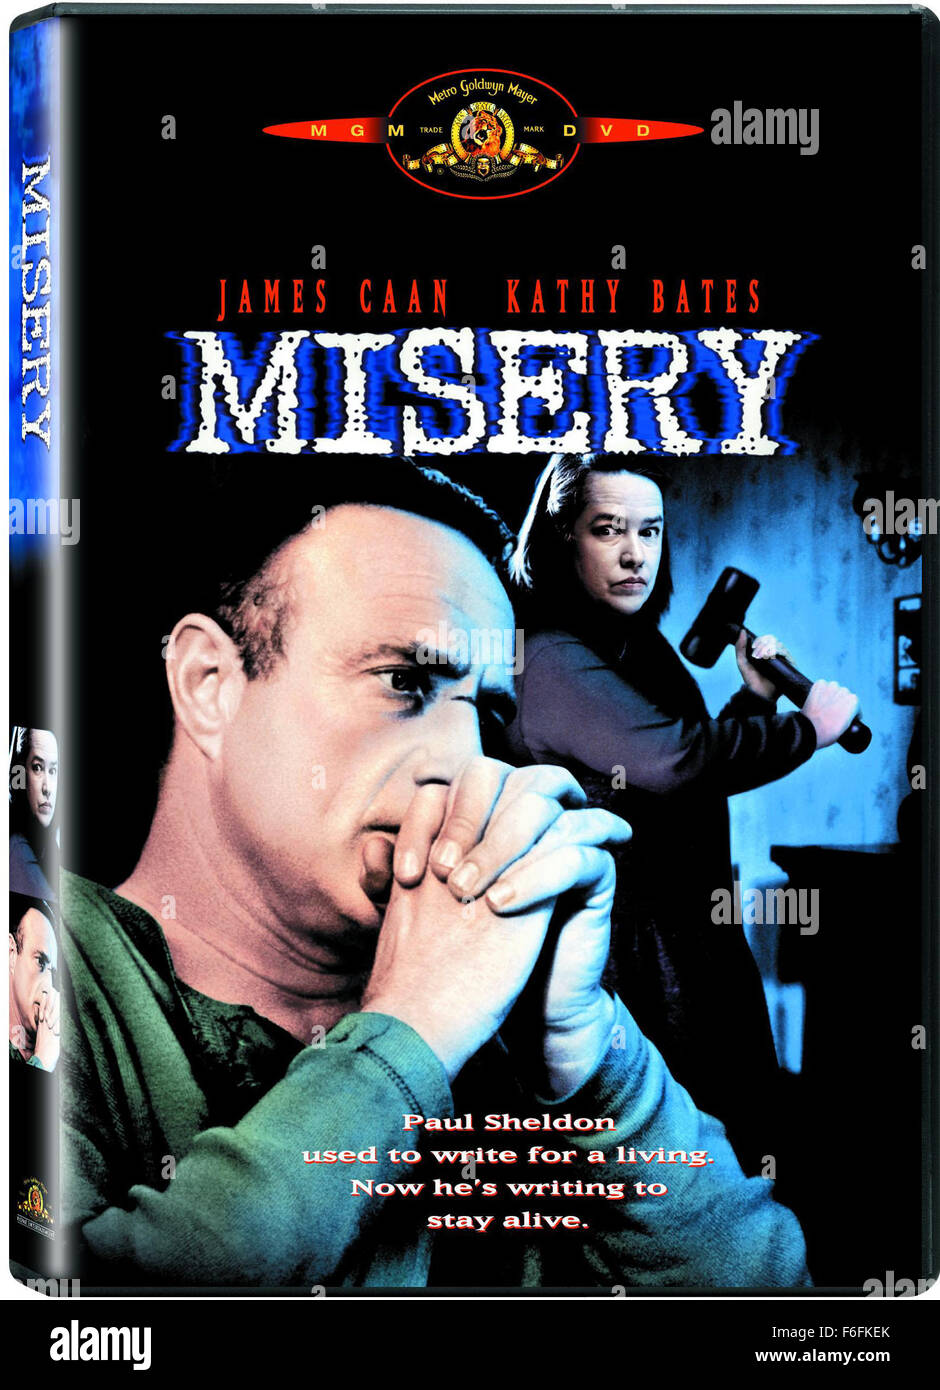 RELEASE DATE: November 30, 1990  MOVIE TITLE: Misery  STUDIO: Castle Rock Entertainment  DIRECTOR: Rob Reiner  PLOT: Novelist Paul Sheldon crashes his car on a snowy Colorado road. He is found by Annie Wilkes, the ''number one fan'' of Paul's heroine Misery Chastaine. Annie is also somewhat unstable, and Paul finds himself crippled, drugged and at her mercy.  PICTURED: JAMES CAAN as Paul Sheldon and KATHY BATES as Annie Wilkes.  (Credit Image: c Castle Rock Entertainment/Entertainment Pictures) Stock Photo